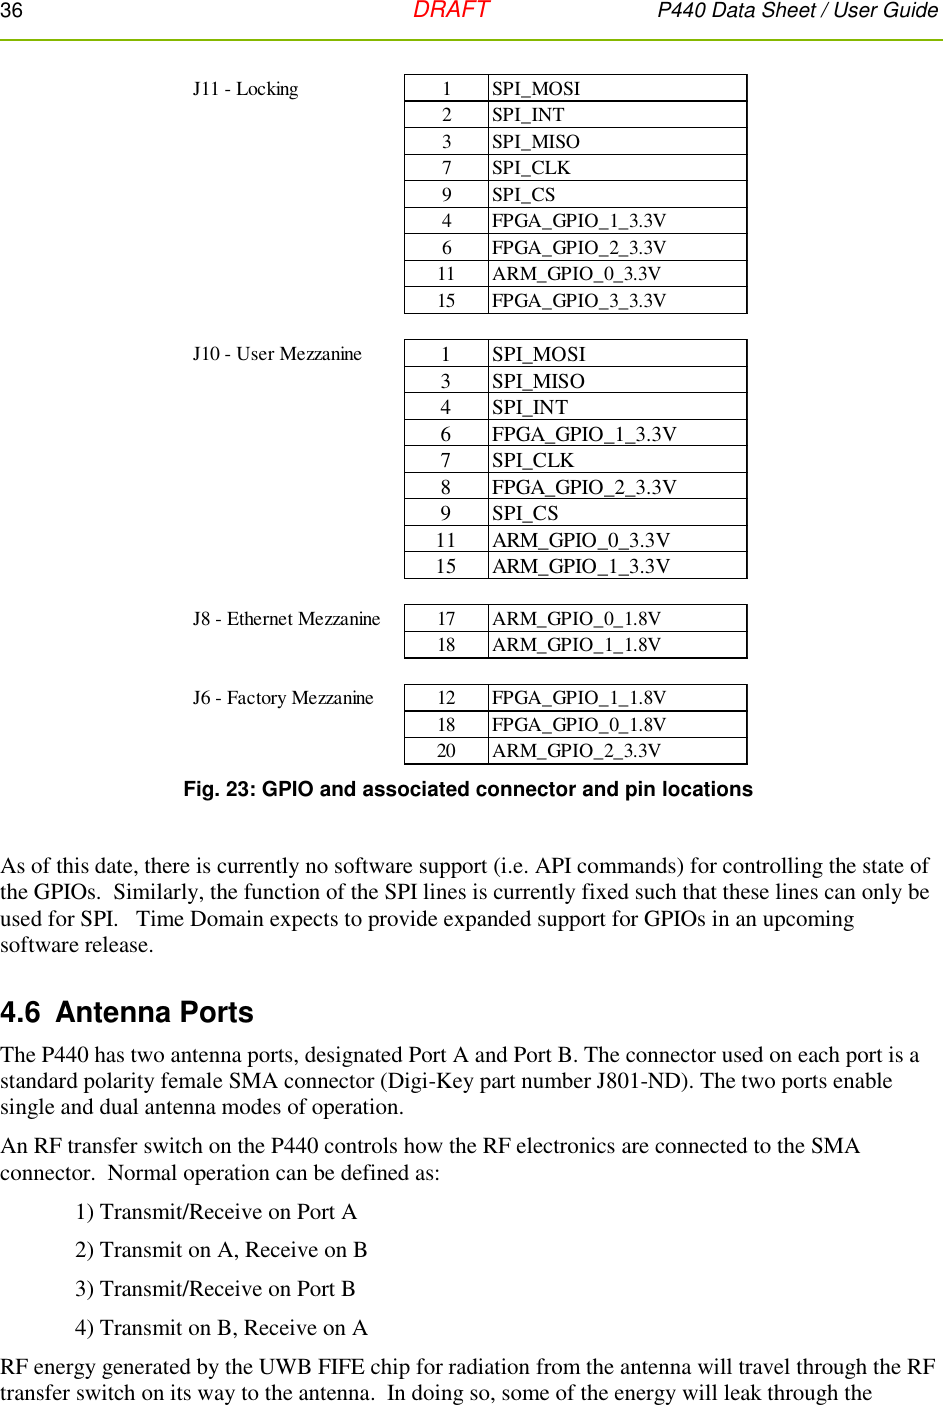 36   DRAFT P440 Data Sheet / User Guide   Fig. 23: GPIO and associated connector and pin locations  As of this date, there is currently no software support (i.e. API commands) for controlling the state of the GPIOs.  Similarly, the function of the SPI lines is currently fixed such that these lines can only be used for SPI.   Time Domain expects to provide expanded support for GPIOs in an upcoming software release. 4.6  Antenna Ports The P440 has two antenna ports, designated Port A and Port B. The connector used on each port is a standard polarity female SMA connector (Digi-Key part number J801-ND). The two ports enable single and dual antenna modes of operation.   An RF transfer switch on the P440 controls how the RF electronics are connected to the SMA connector.  Normal operation can be defined as:  1) Transmit/Receive on Port A  2) Transmit on A, Receive on B 3) Transmit/Receive on Port B   4) Transmit on B, Receive on A   RF energy generated by the UWB FIFE chip for radiation from the antenna will travel through the RF transfer switch on its way to the antenna.  In doing so, some of the energy will leak through the J11 - Locking1 SPI_MOSI2 SPI_INT3 SPI_MISO7 SPI_CLK9 SPI_CS4 FPGA_GPIO_1_3.3V6 FPGA_GPIO_2_3.3V11 ARM_GPIO_0_3.3V15 FPGA_GPIO_3_3.3VJ10 - User Mezzanine1 SPI_MOSI3 SPI_MISO4 SPI_INT6 FPGA_GPIO_1_3.3V7 SPI_CLK8 FPGA_GPIO_2_3.3V9 SPI_CS11 ARM_GPIO_0_3.3V15 ARM_GPIO_1_3.3VJ8 - Ethernet Mezzanine17 ARM_GPIO_0_1.8V18 ARM_GPIO_1_1.8VJ6 - Factory Mezzanine12 FPGA_GPIO_1_1.8V18 FPGA_GPIO_0_1.8V20 ARM_GPIO_2_3.3V